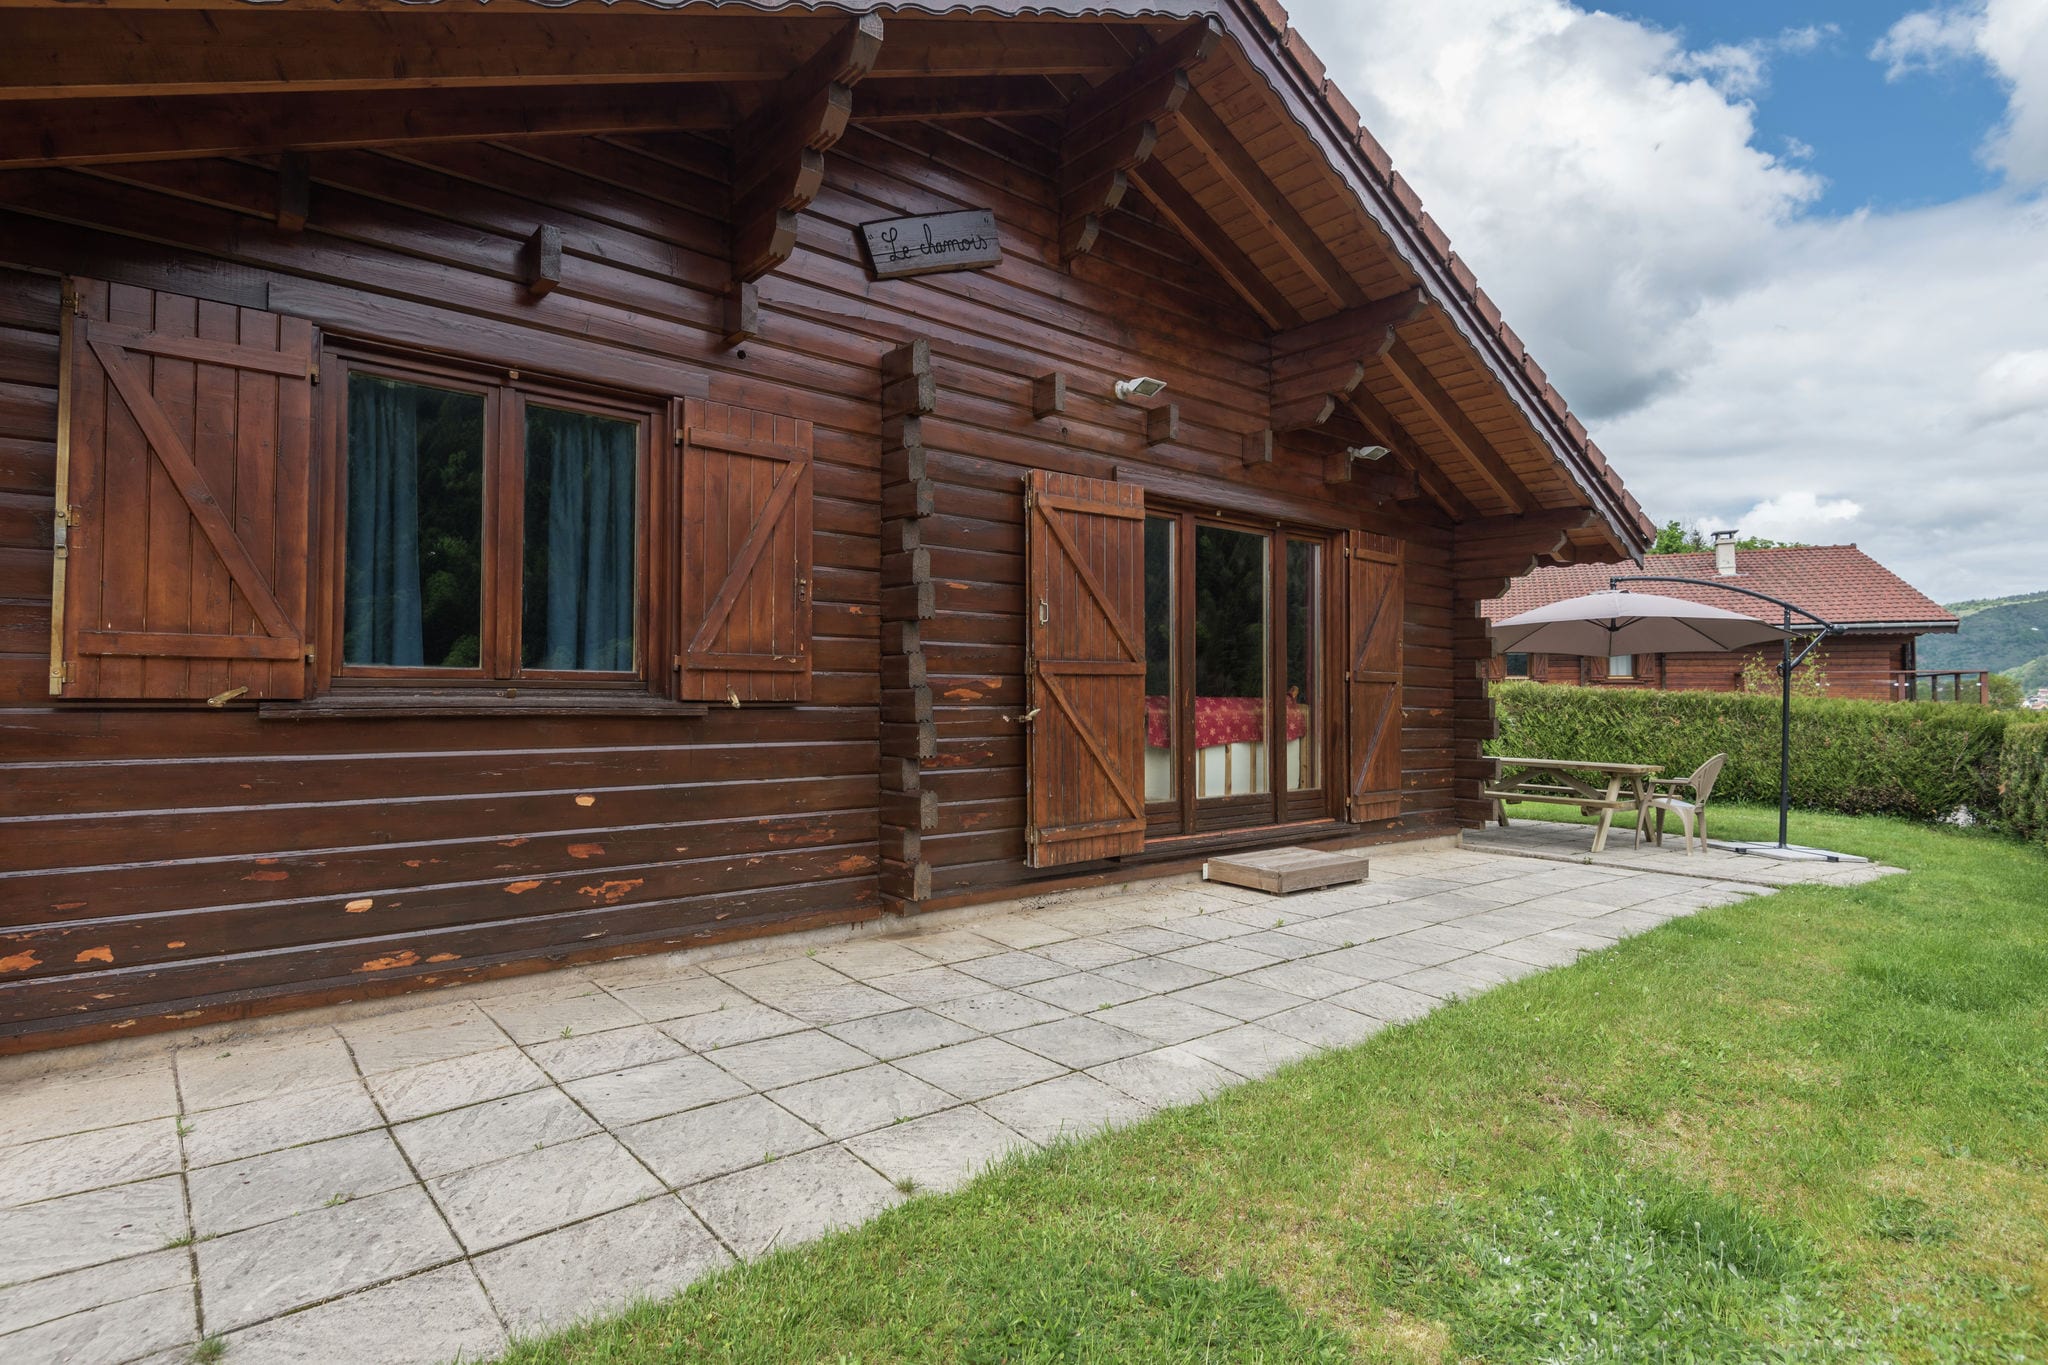 Chalet in lovely, rich forest setting with a beautiful view.